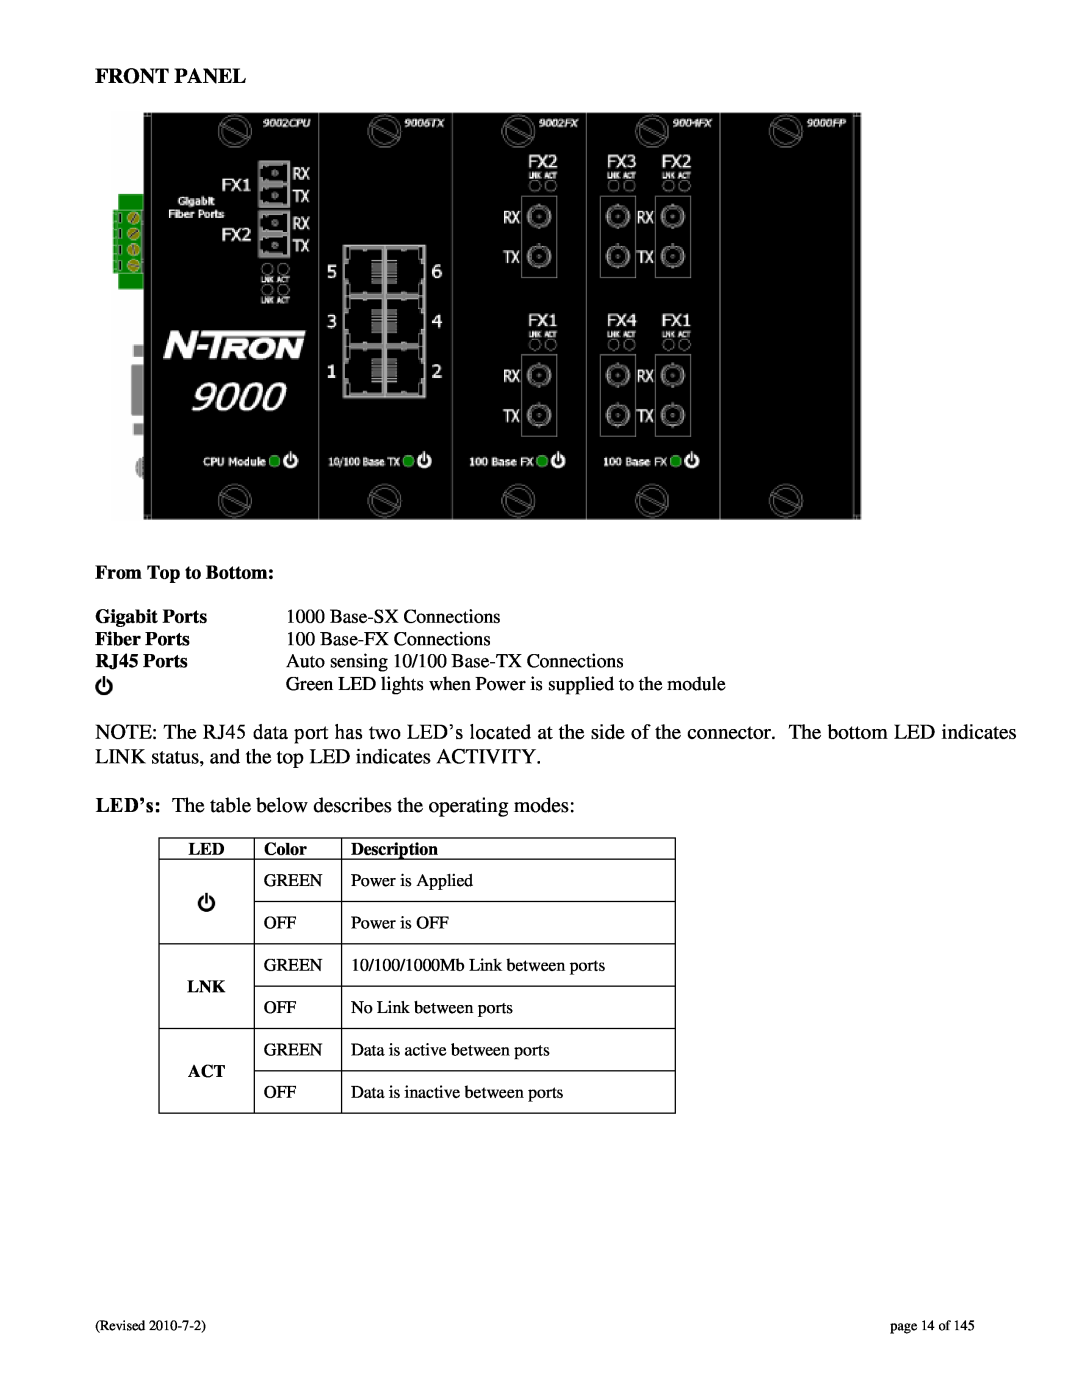 N-Tron 9000 user manual Front Panel 